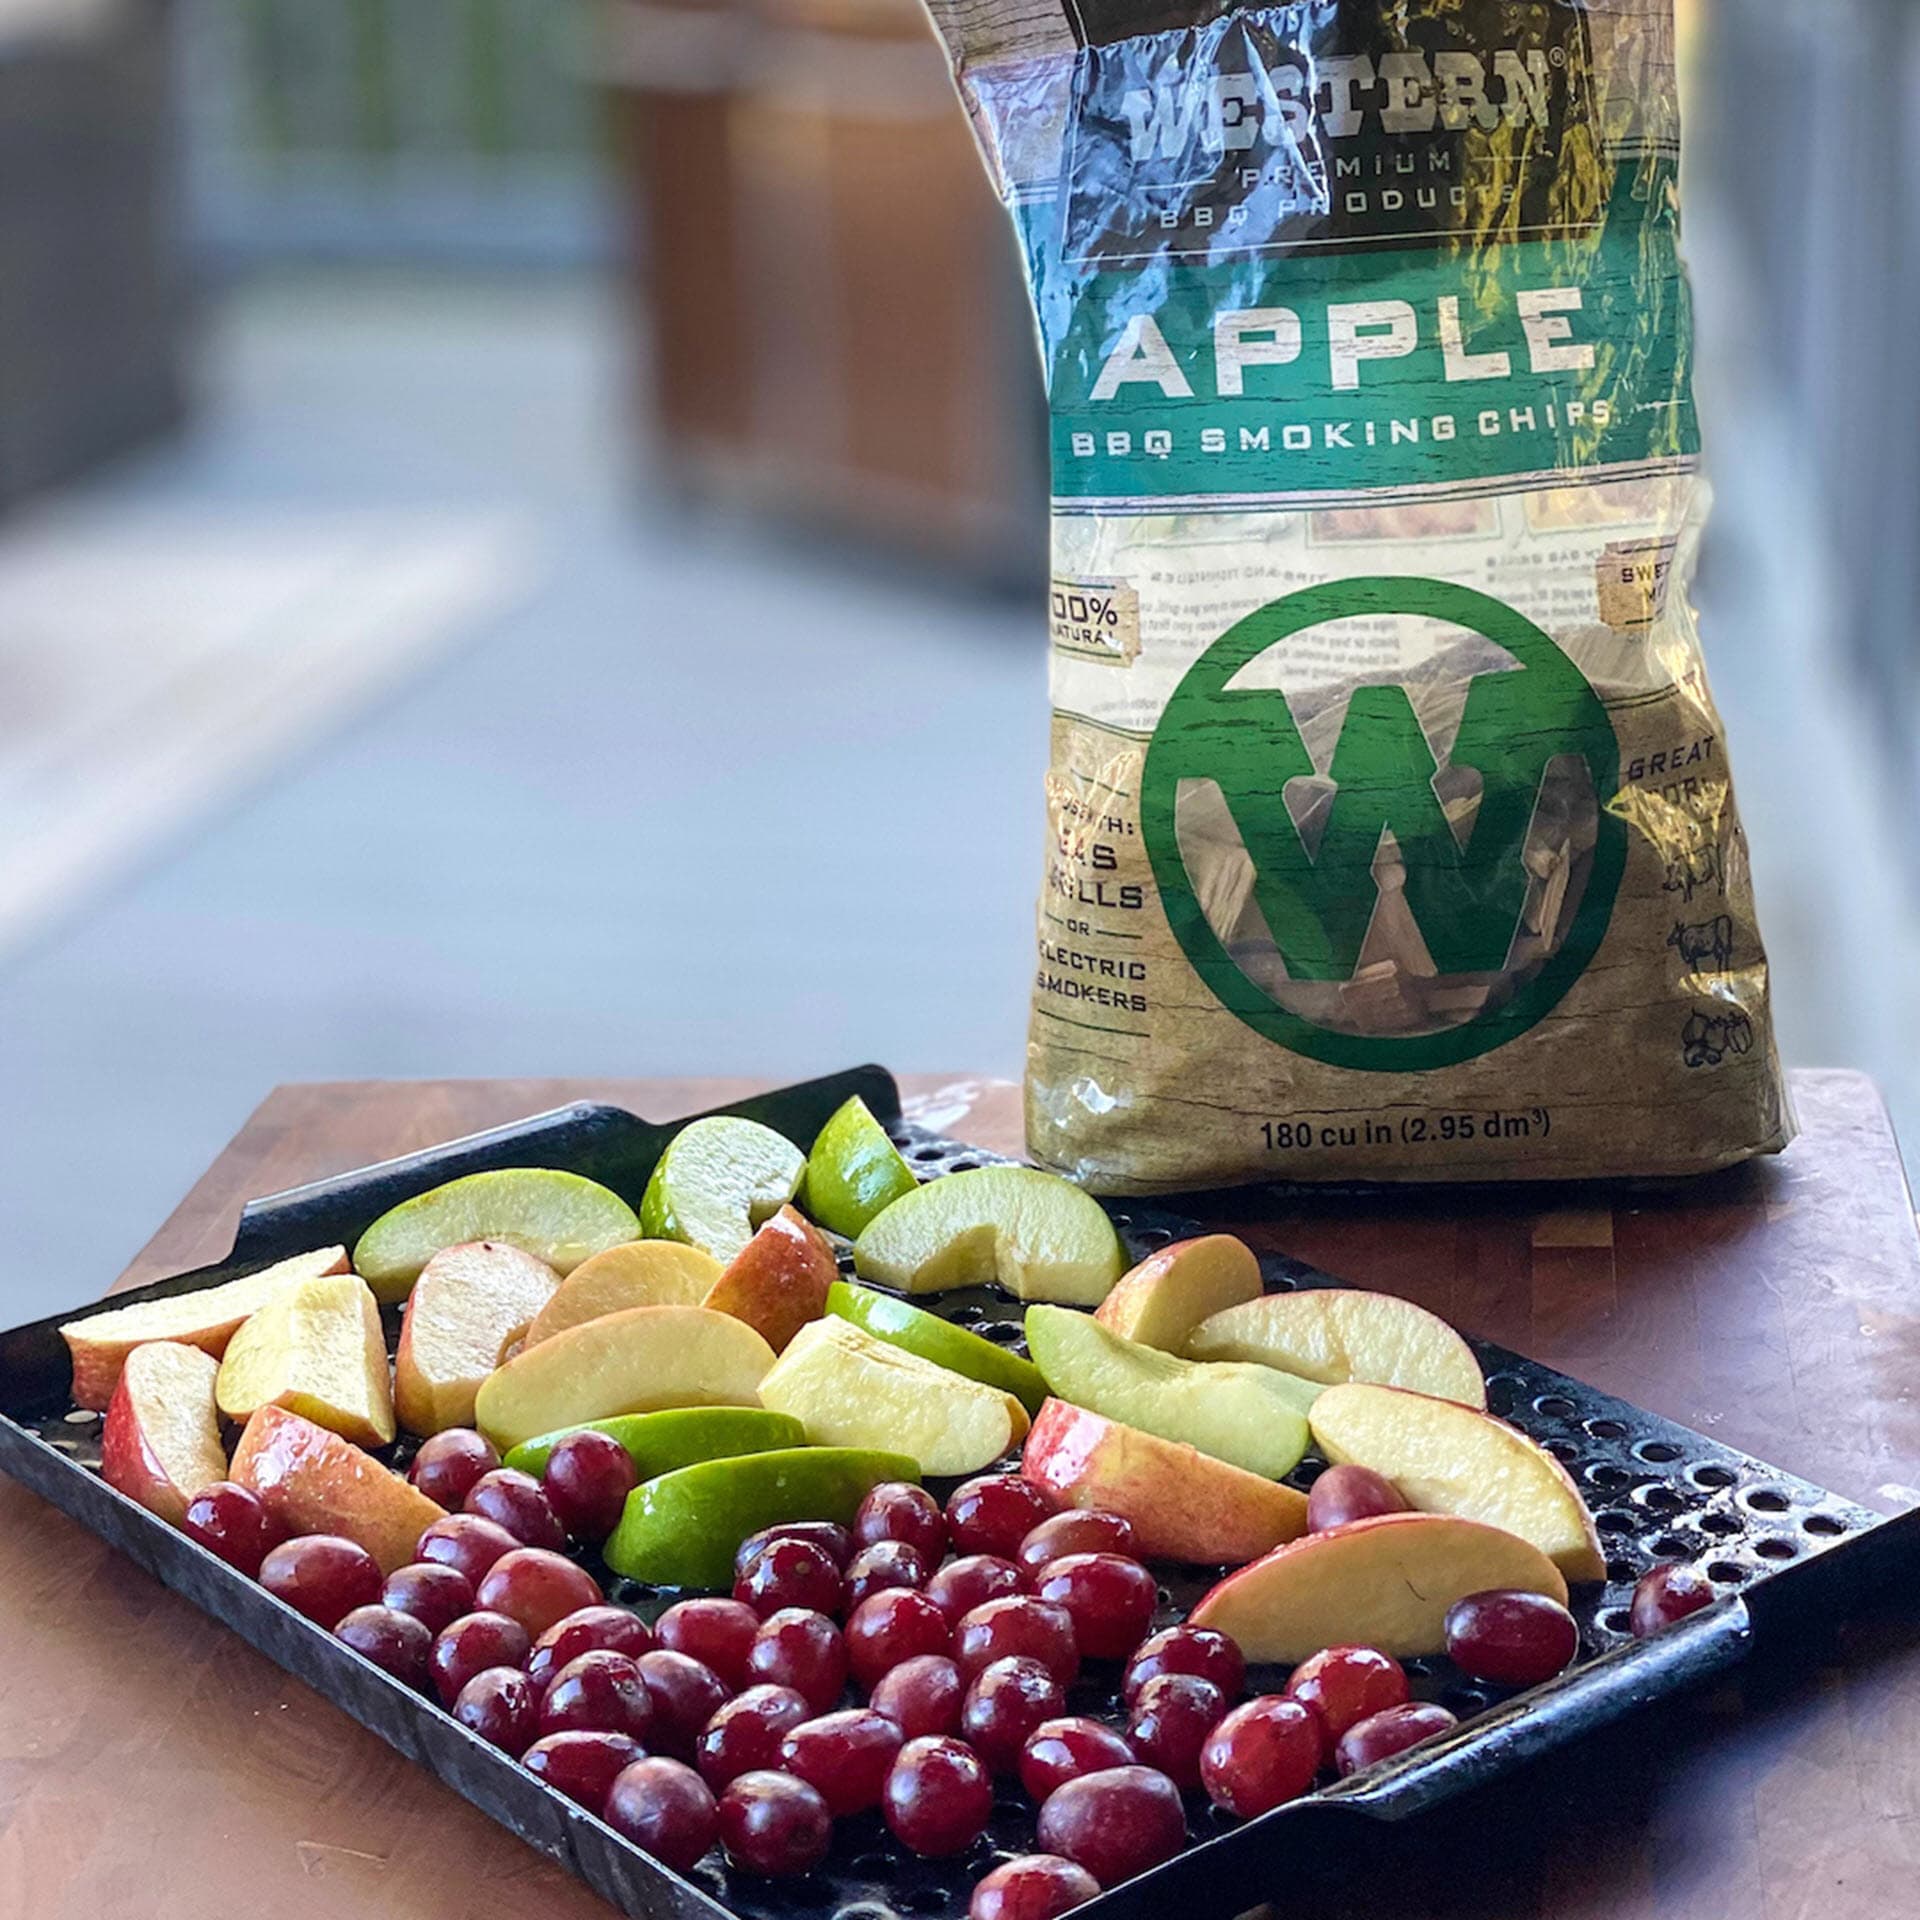 Grapes and sliced apples on grill plate with bag of Western Apple BBQ Smoking Chips